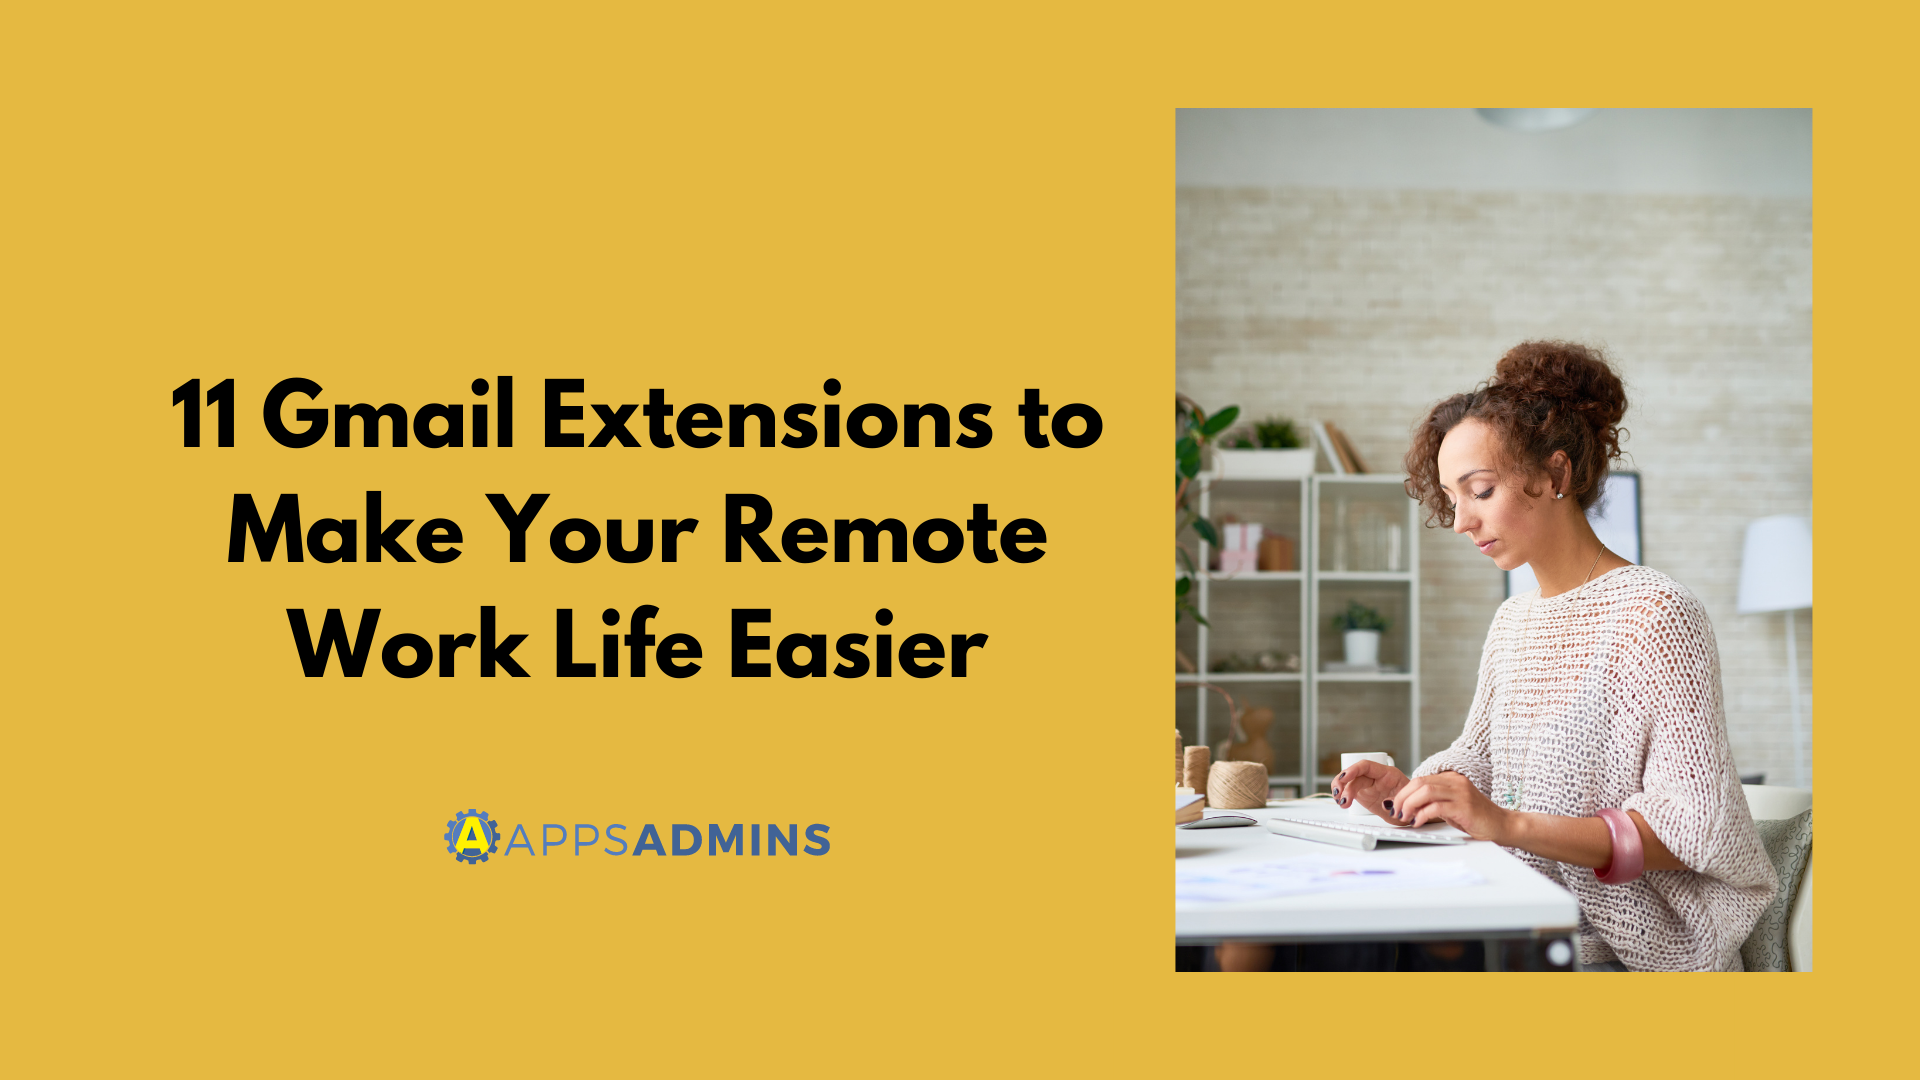 11 Gmail Extensions to Make Your Remote Work Life Easier